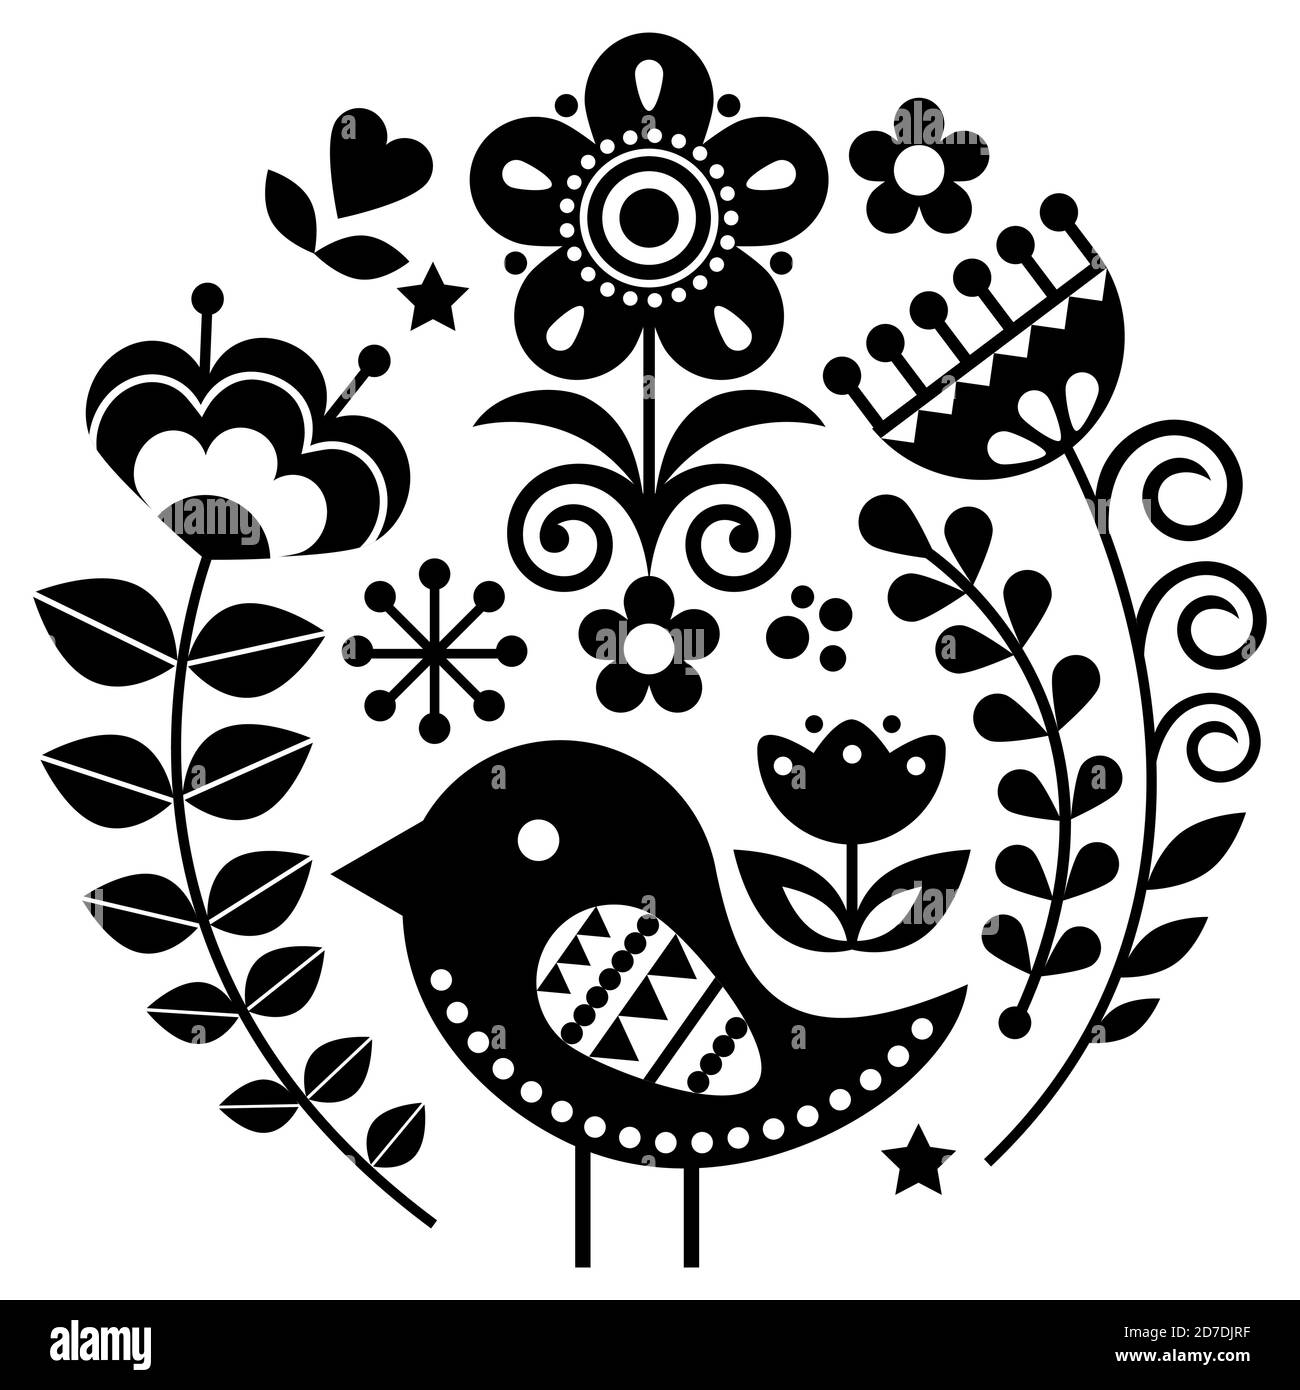 Scandinavian folk art vector pattern with flowers and bird in circle, black floral greeting card or invitation inspired by traditional embroidery from Stock Vector